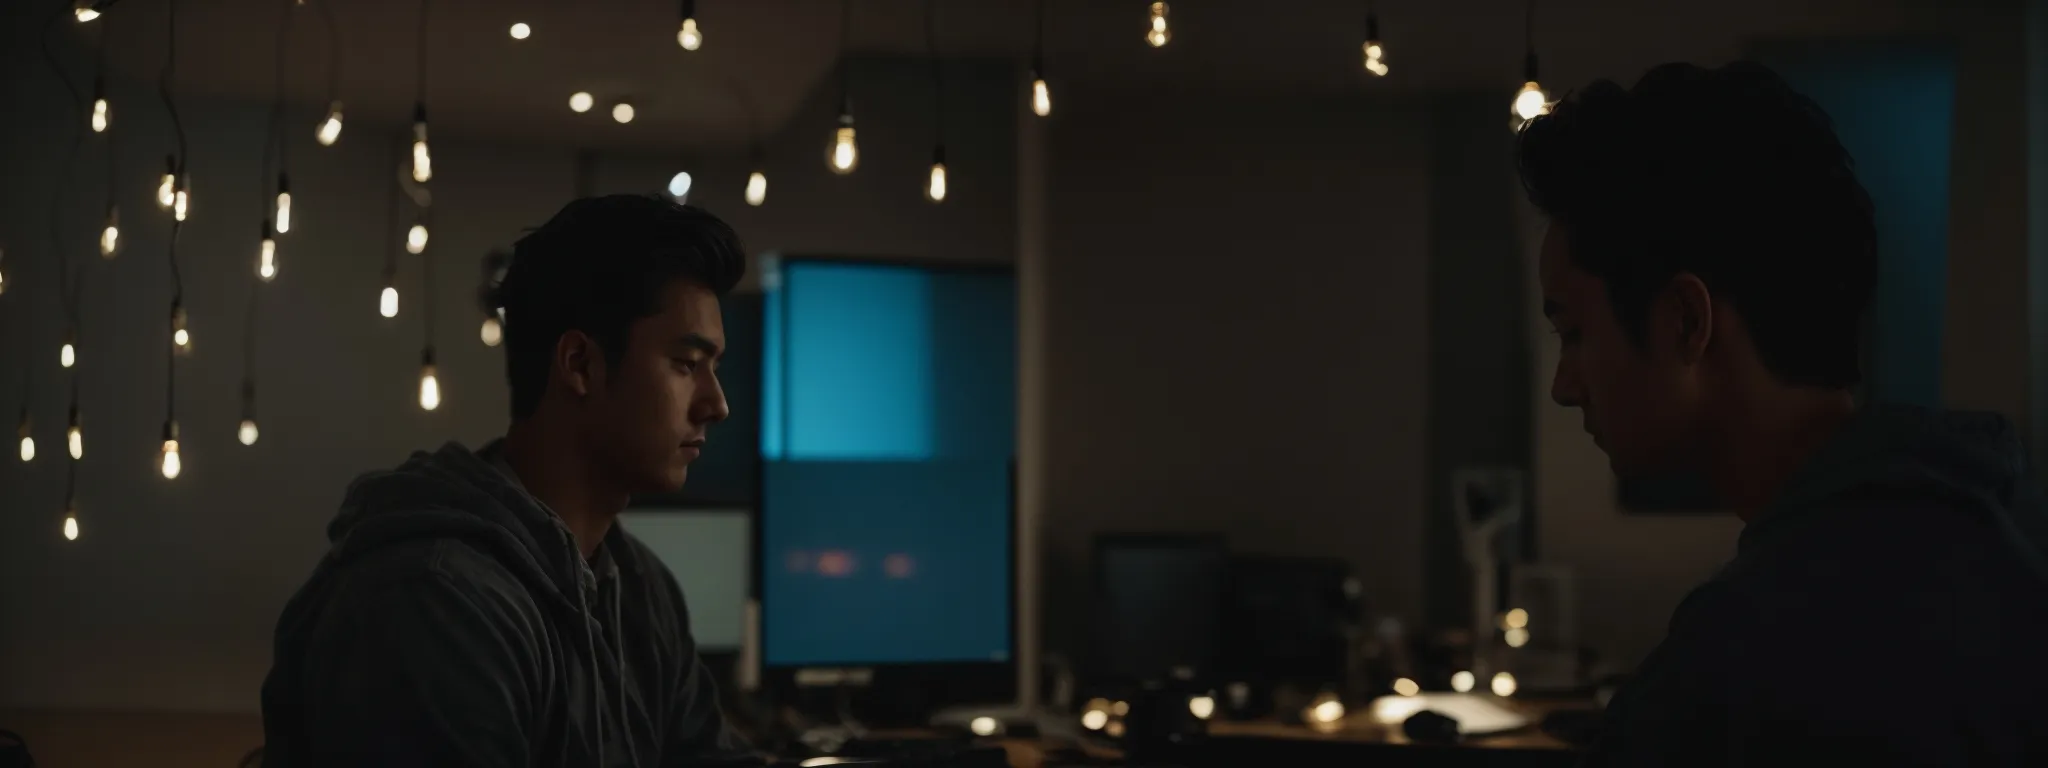 a content creator thoughtfully gazes at a computer screen, surrounded by the glow of ideas symbolized by a light bulb.